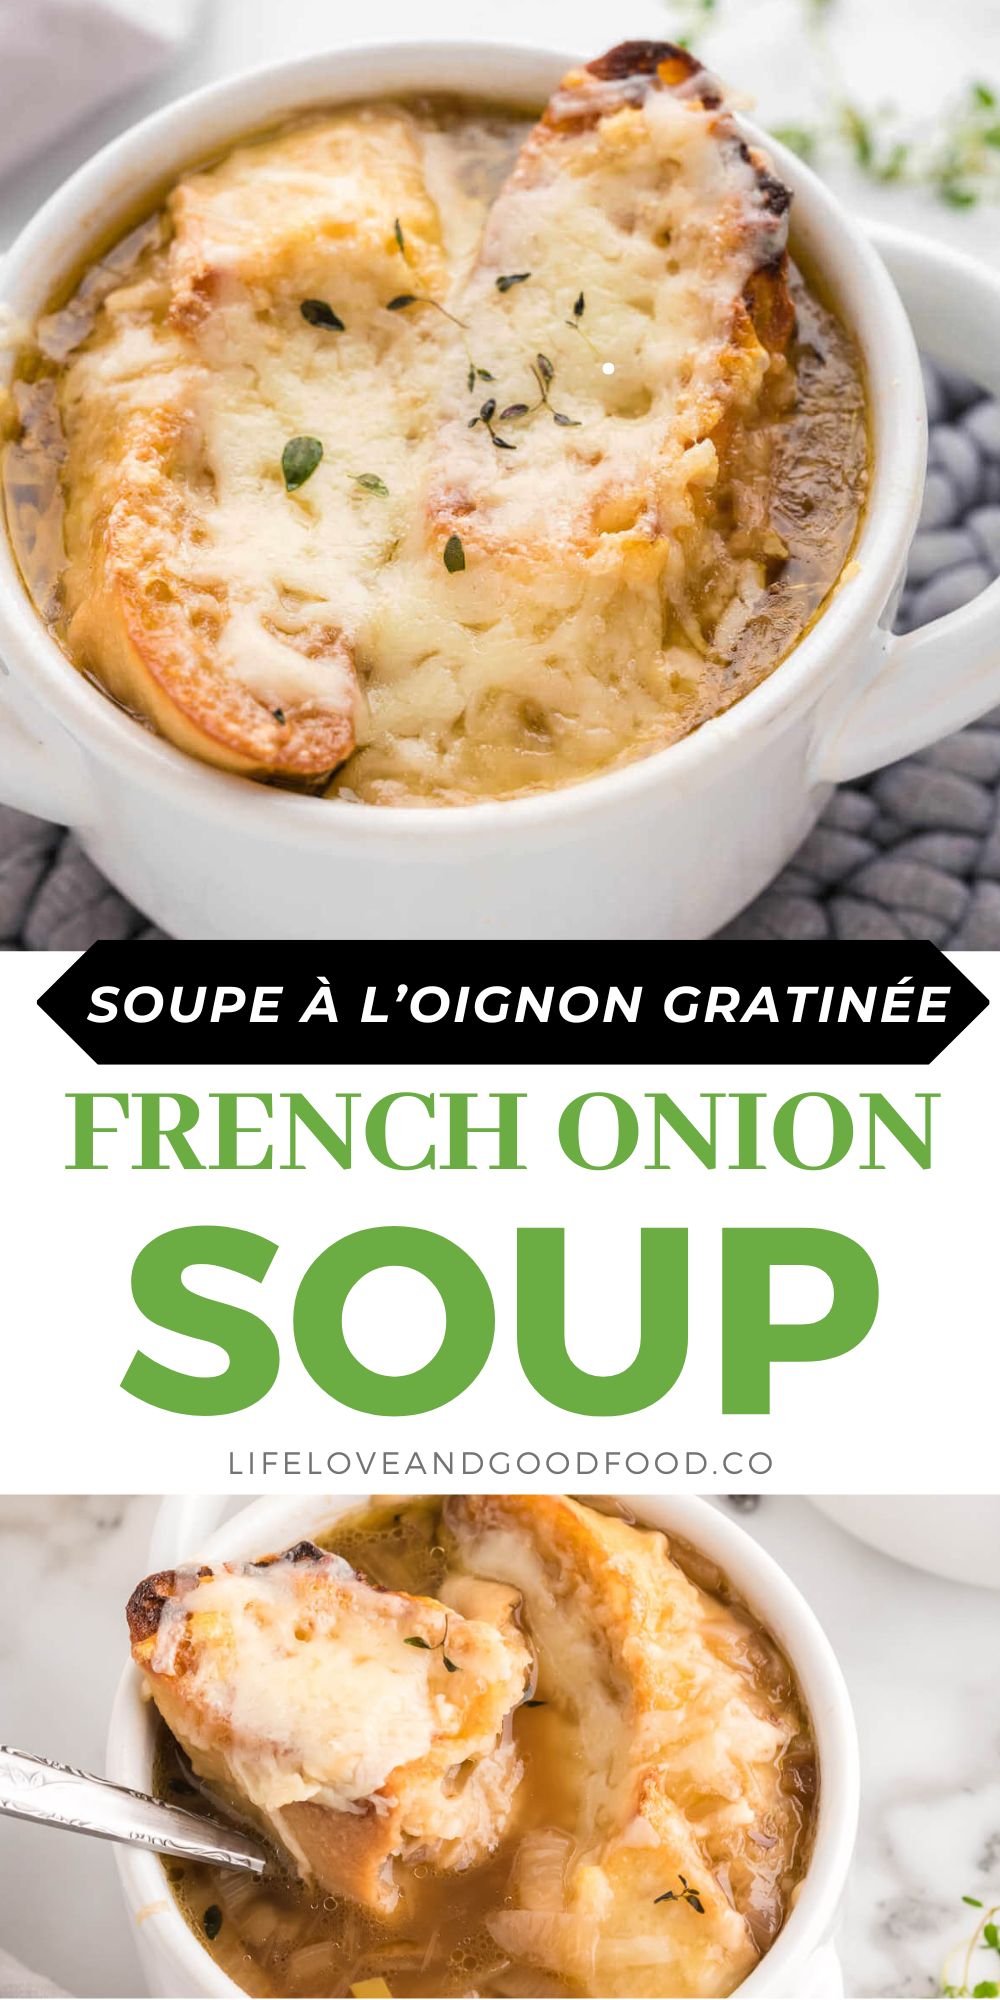 French Onion Soup - Life, Love, and Good Food